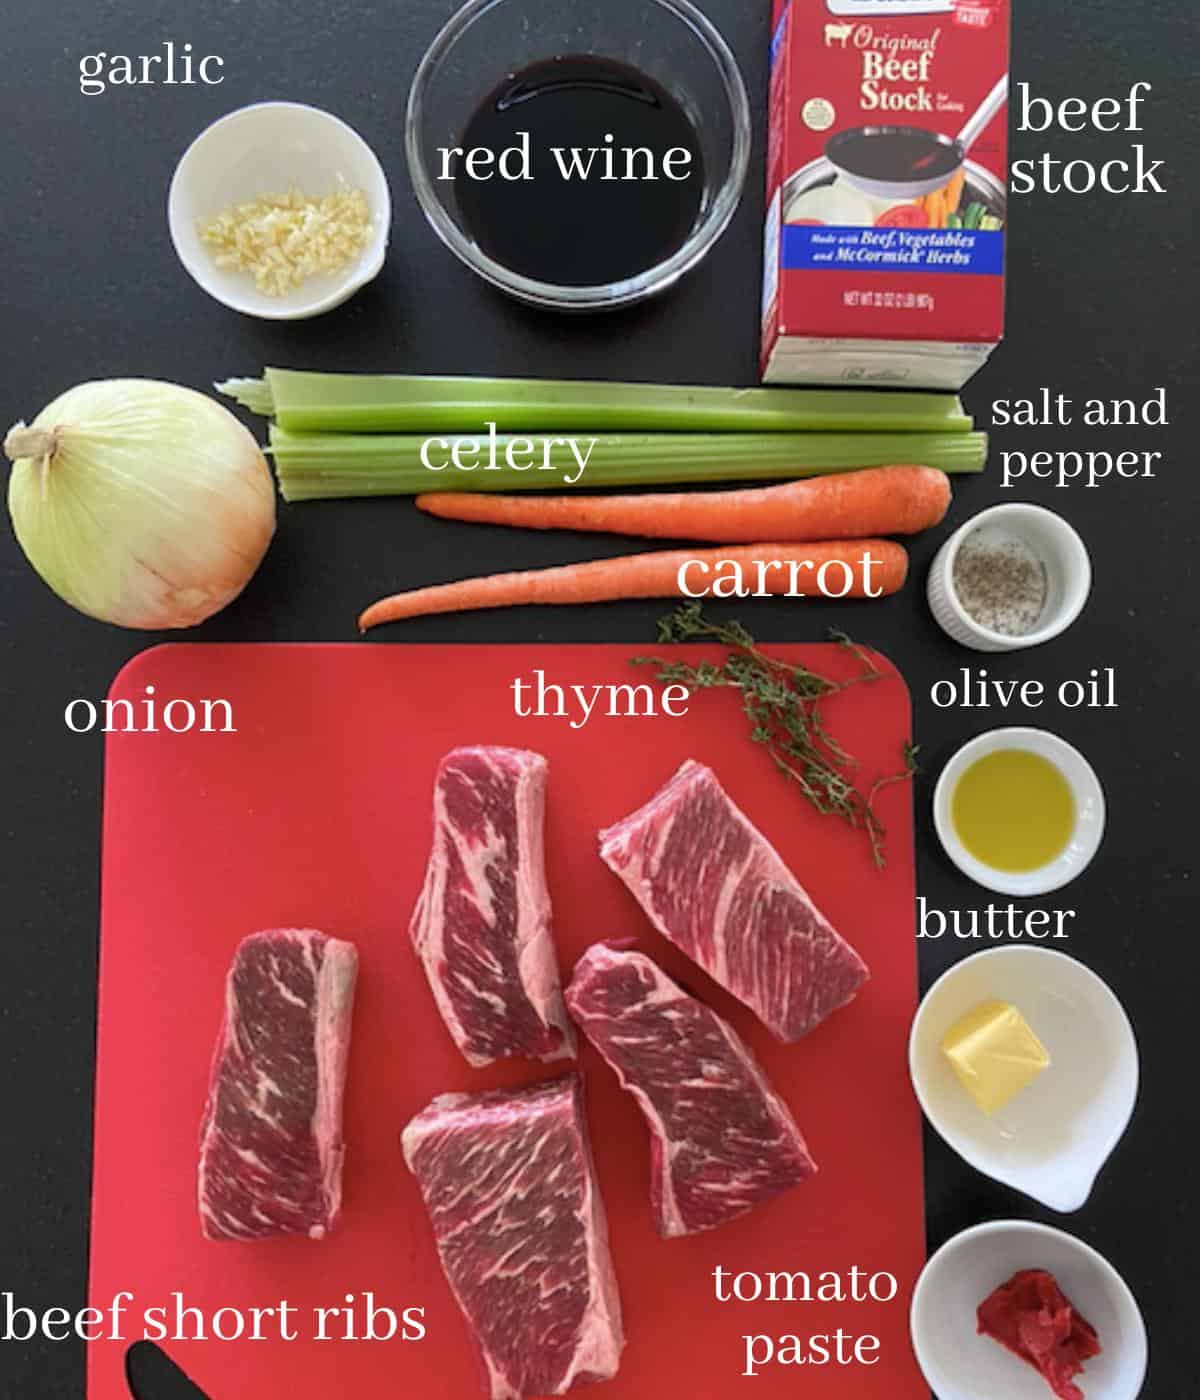 beef short rib ingredients on countertop with text